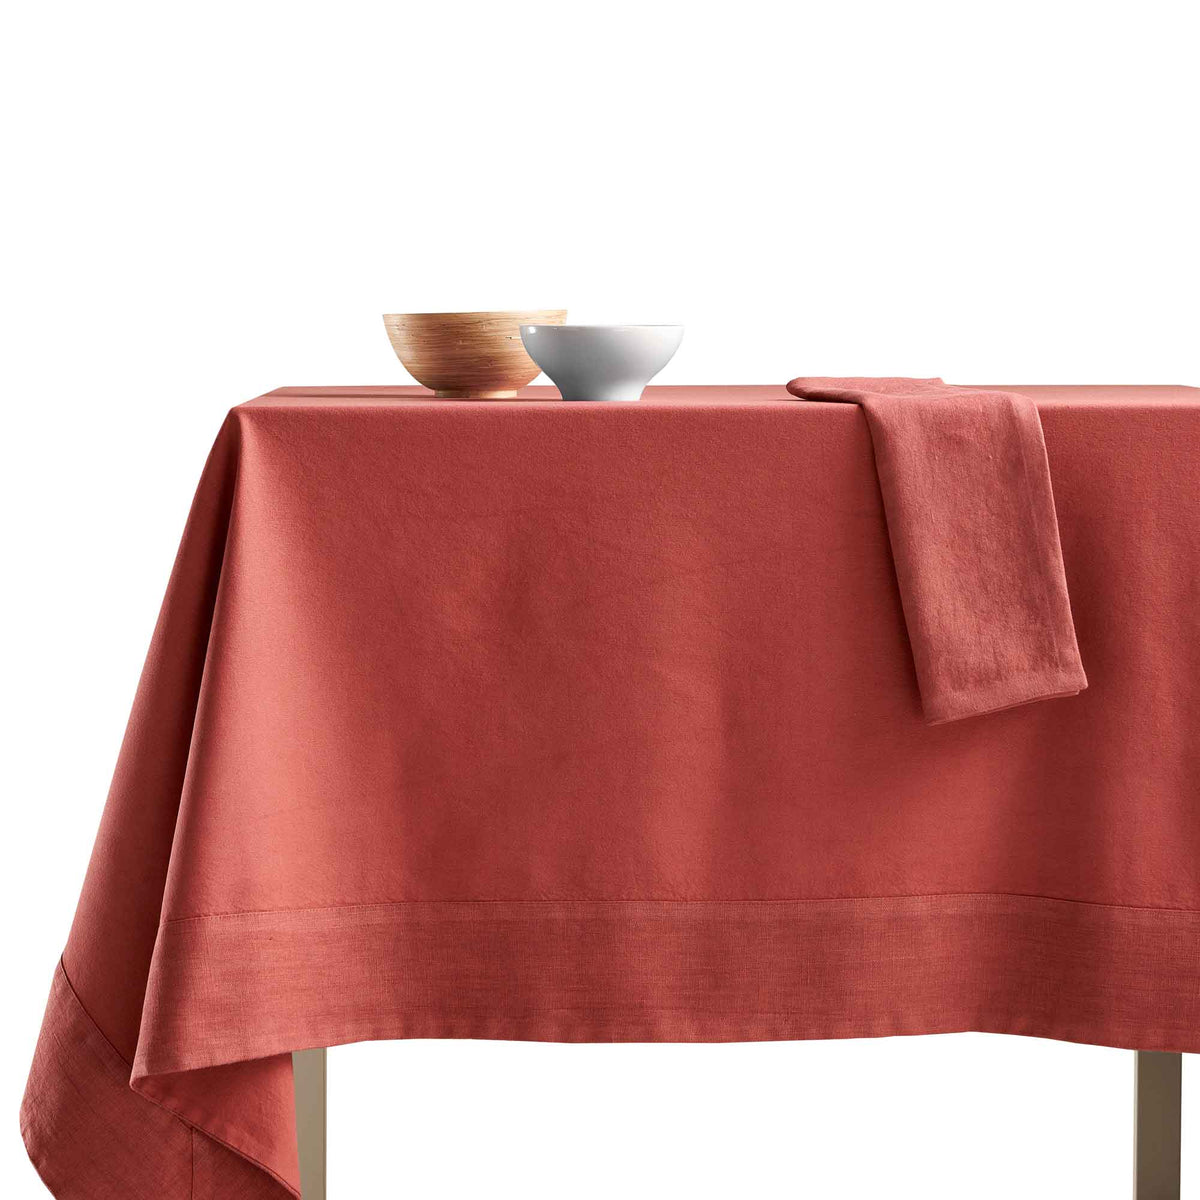 Tablecloth in StoneWashed Cotton with Linen Edge - Loira